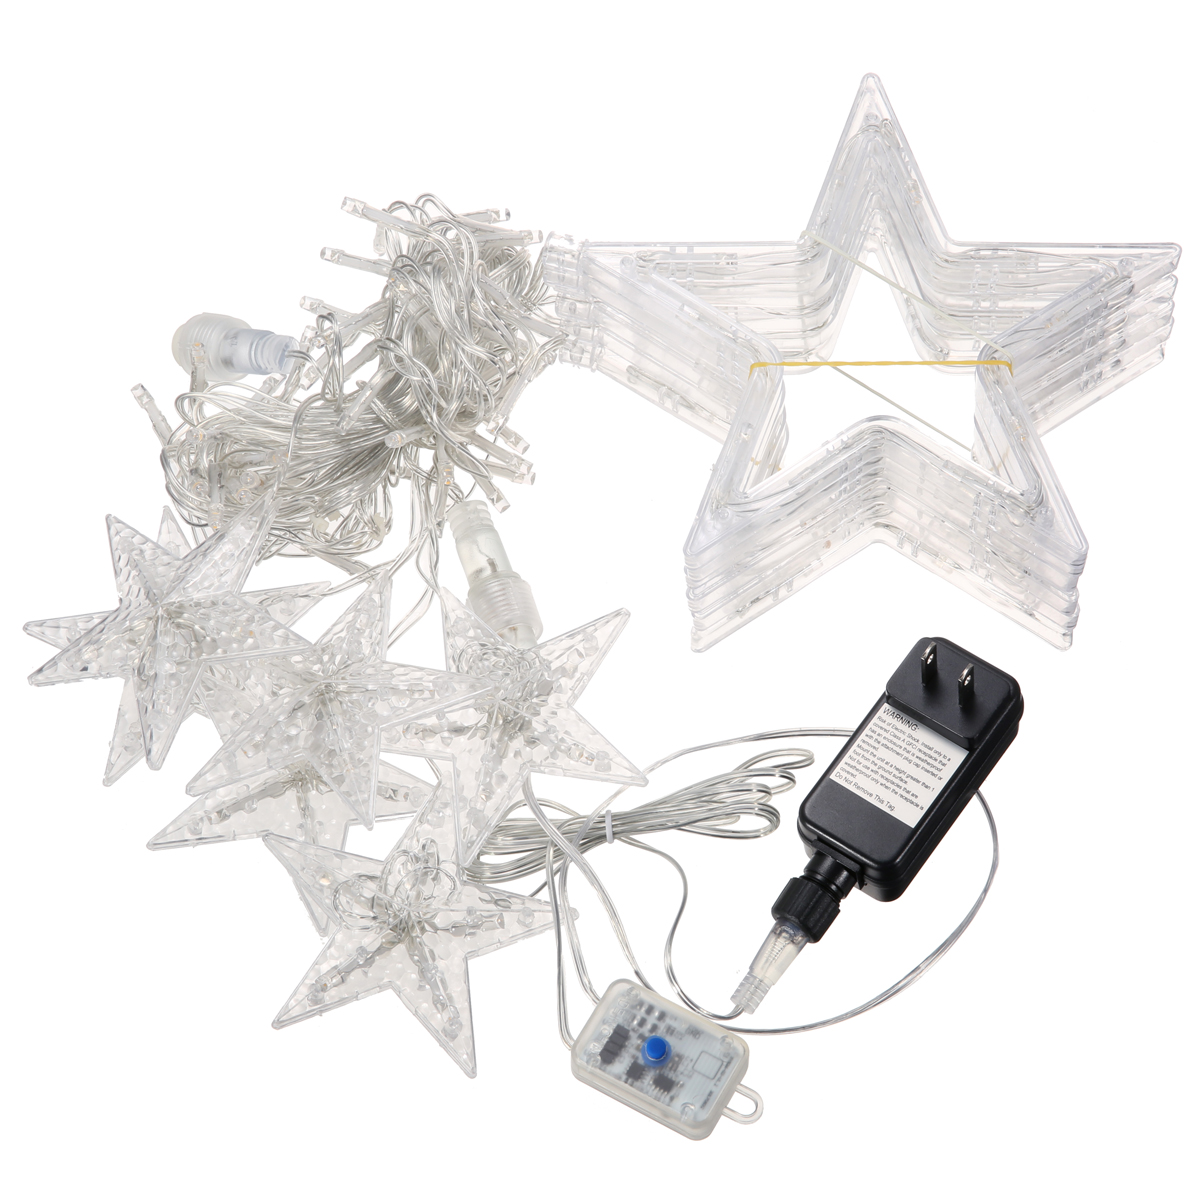 Find Romantic Warm White Star Light String 4M 12 Stars 138LEDs IP44 Waterproof Remote Timing Night Light Wedding Party Home Decor for Sale on Gipsybee.com with cryptocurrencies